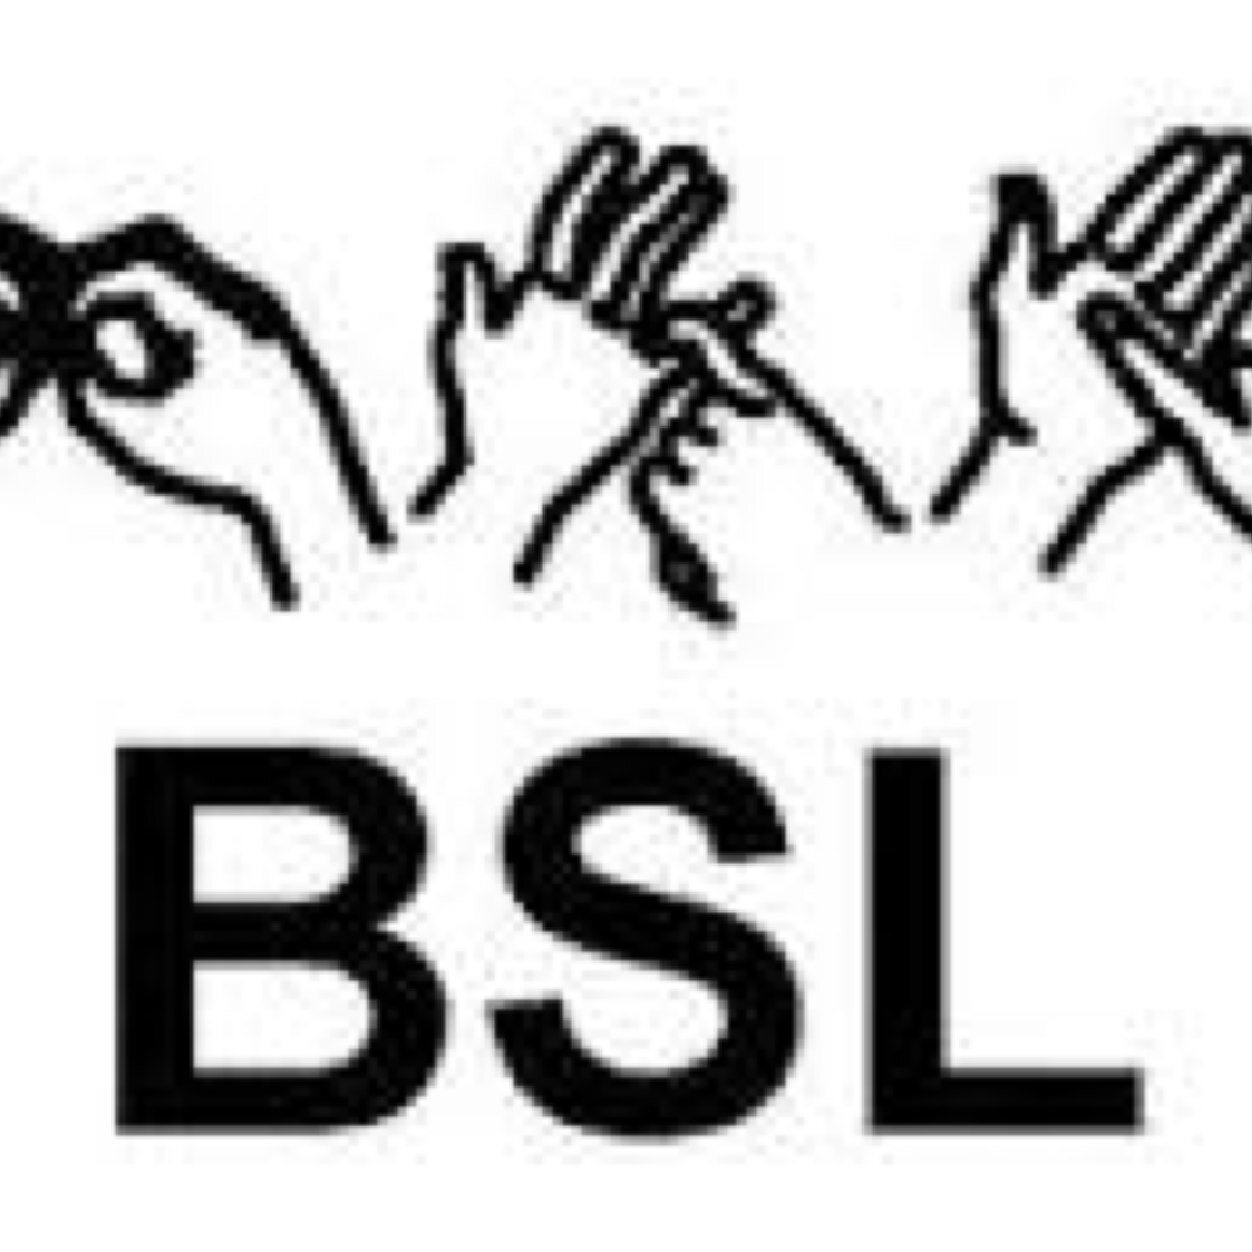 This is designed to help people revise for there BSL exams. Anyone is welcome to post and comment on videos